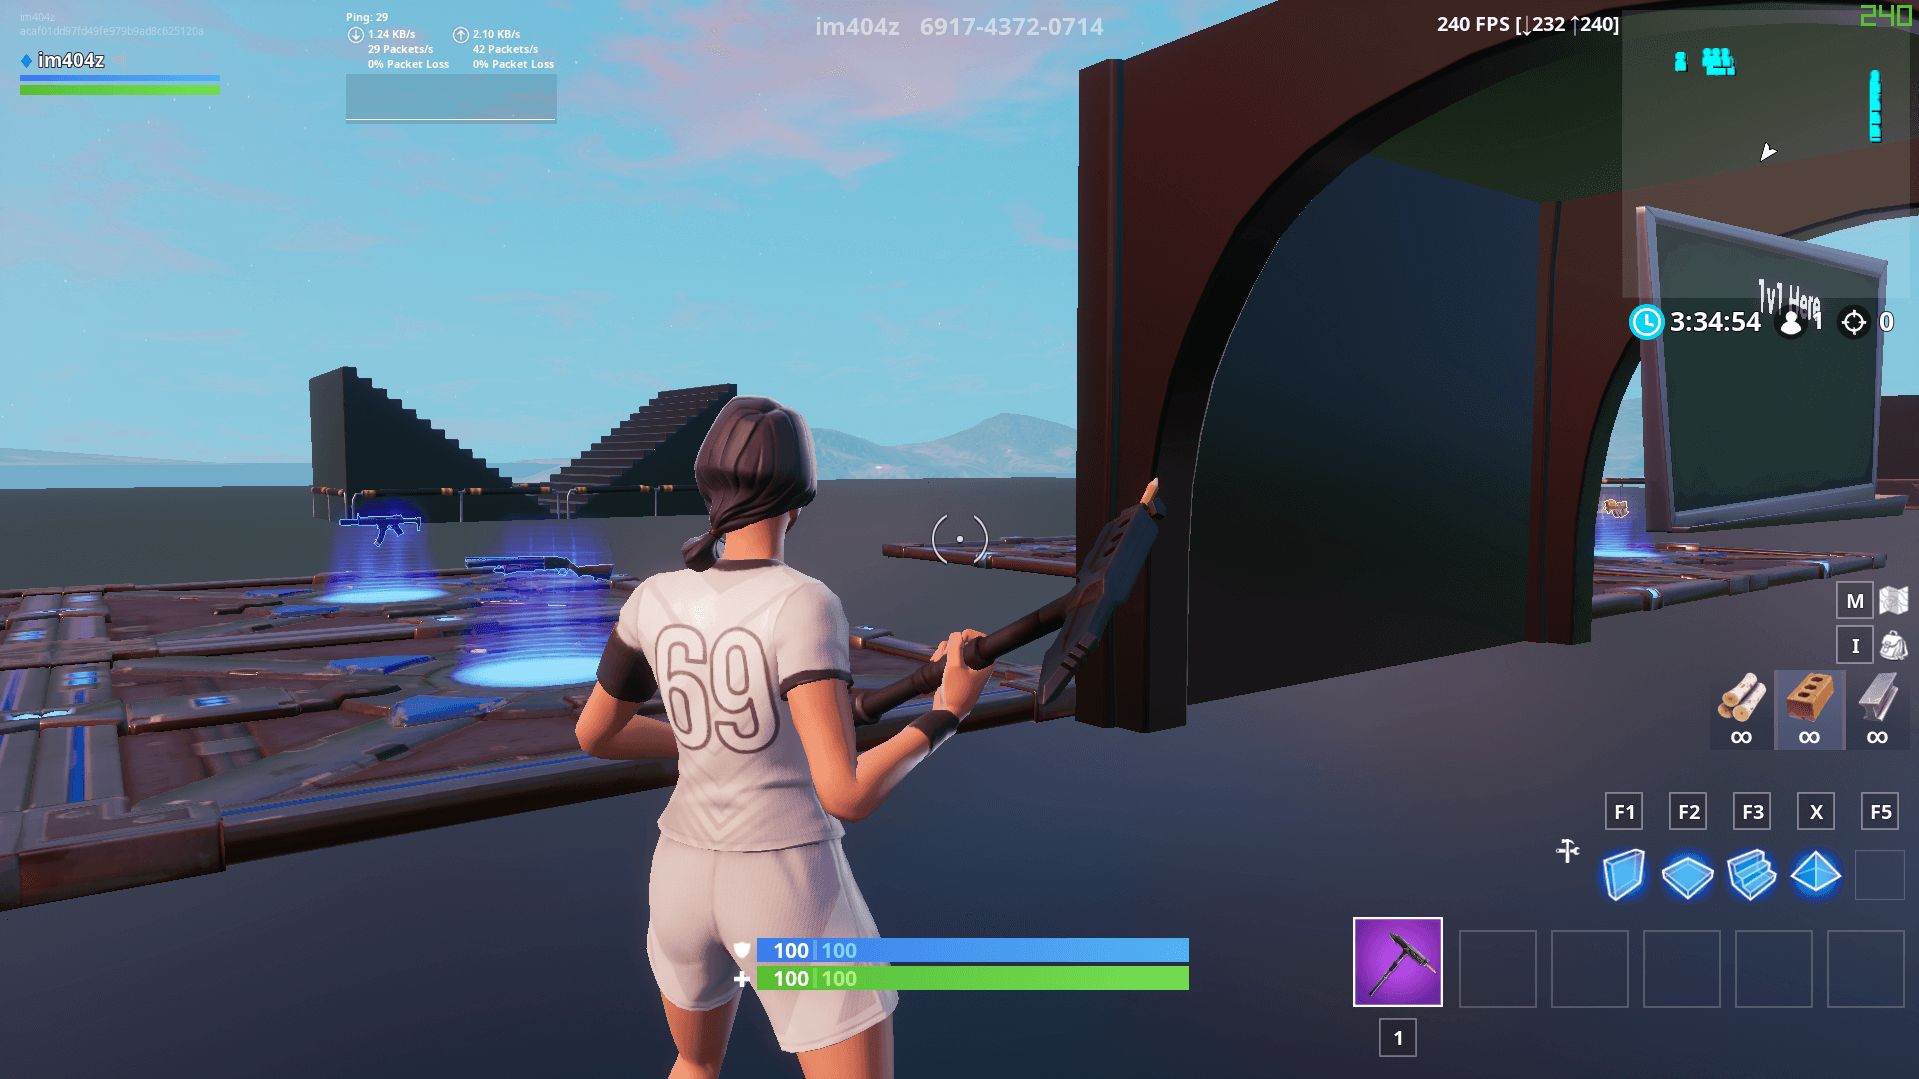 Cloud 1v1 [Practice Map] [PRO] 3559-0013-0504 by spunk7 - Fortnite Creative  Map Code 